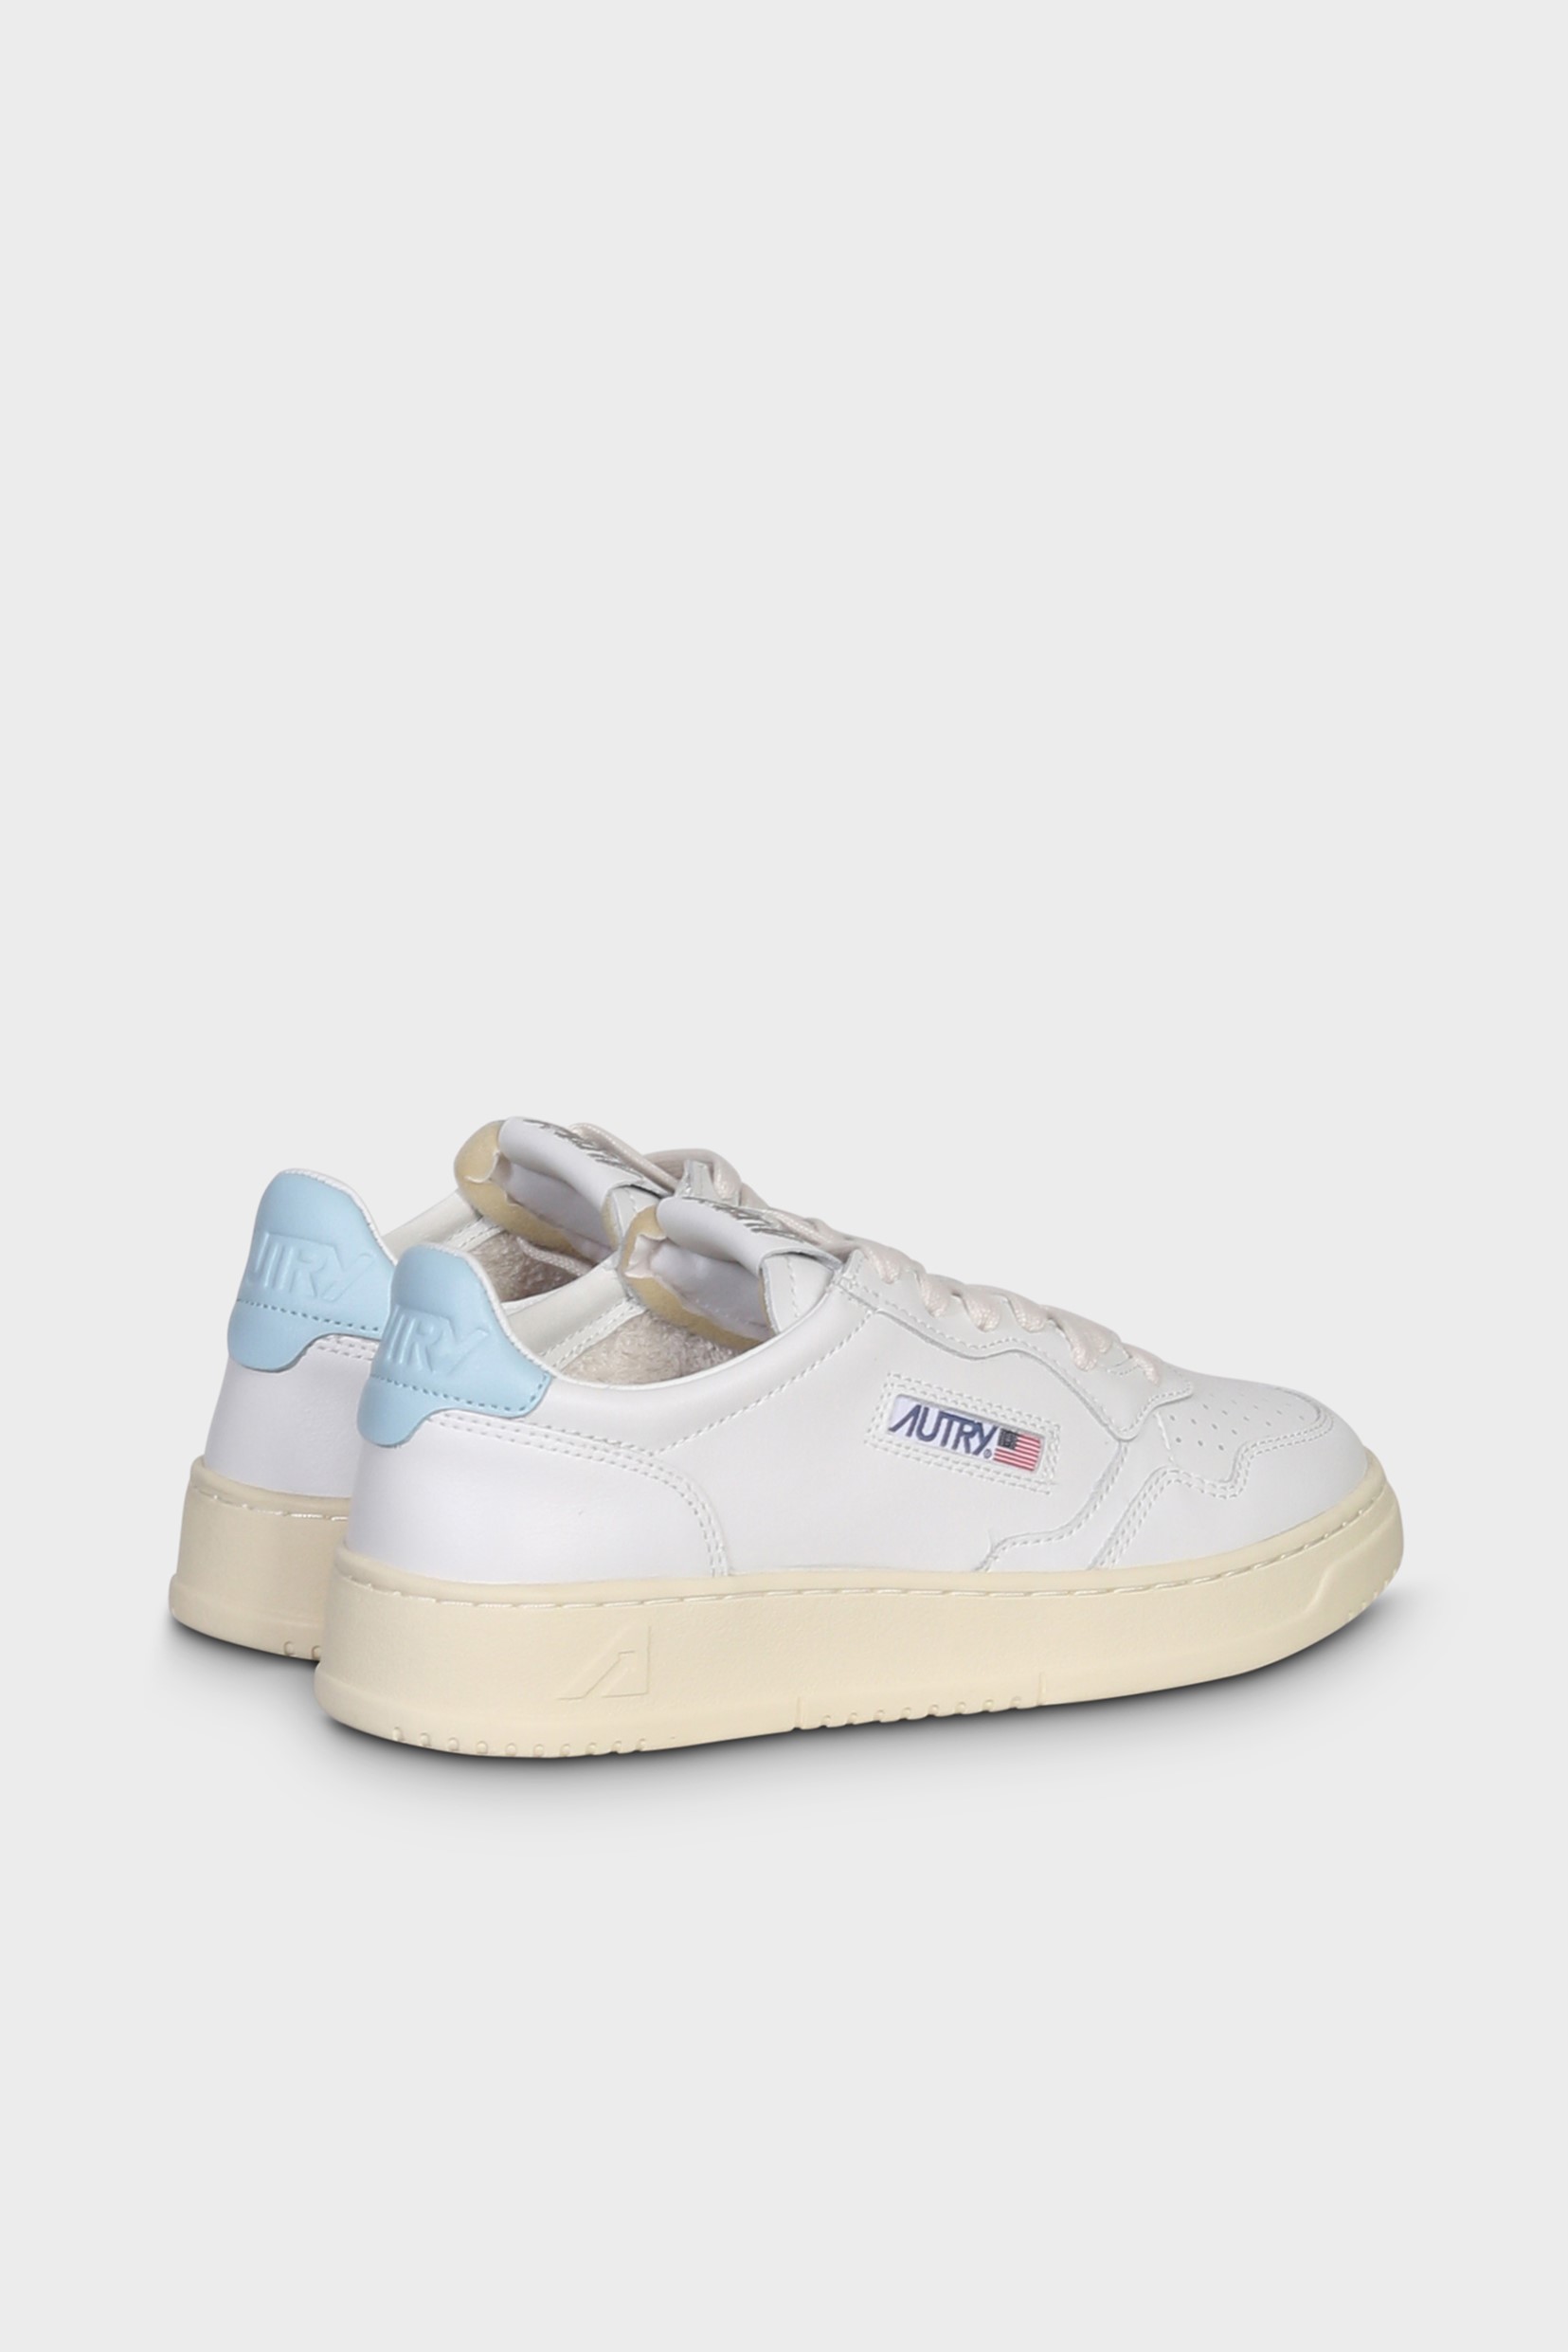 AUTRY ACTION SHOES Medalist Low Sneaker in White/Stream Blue 41